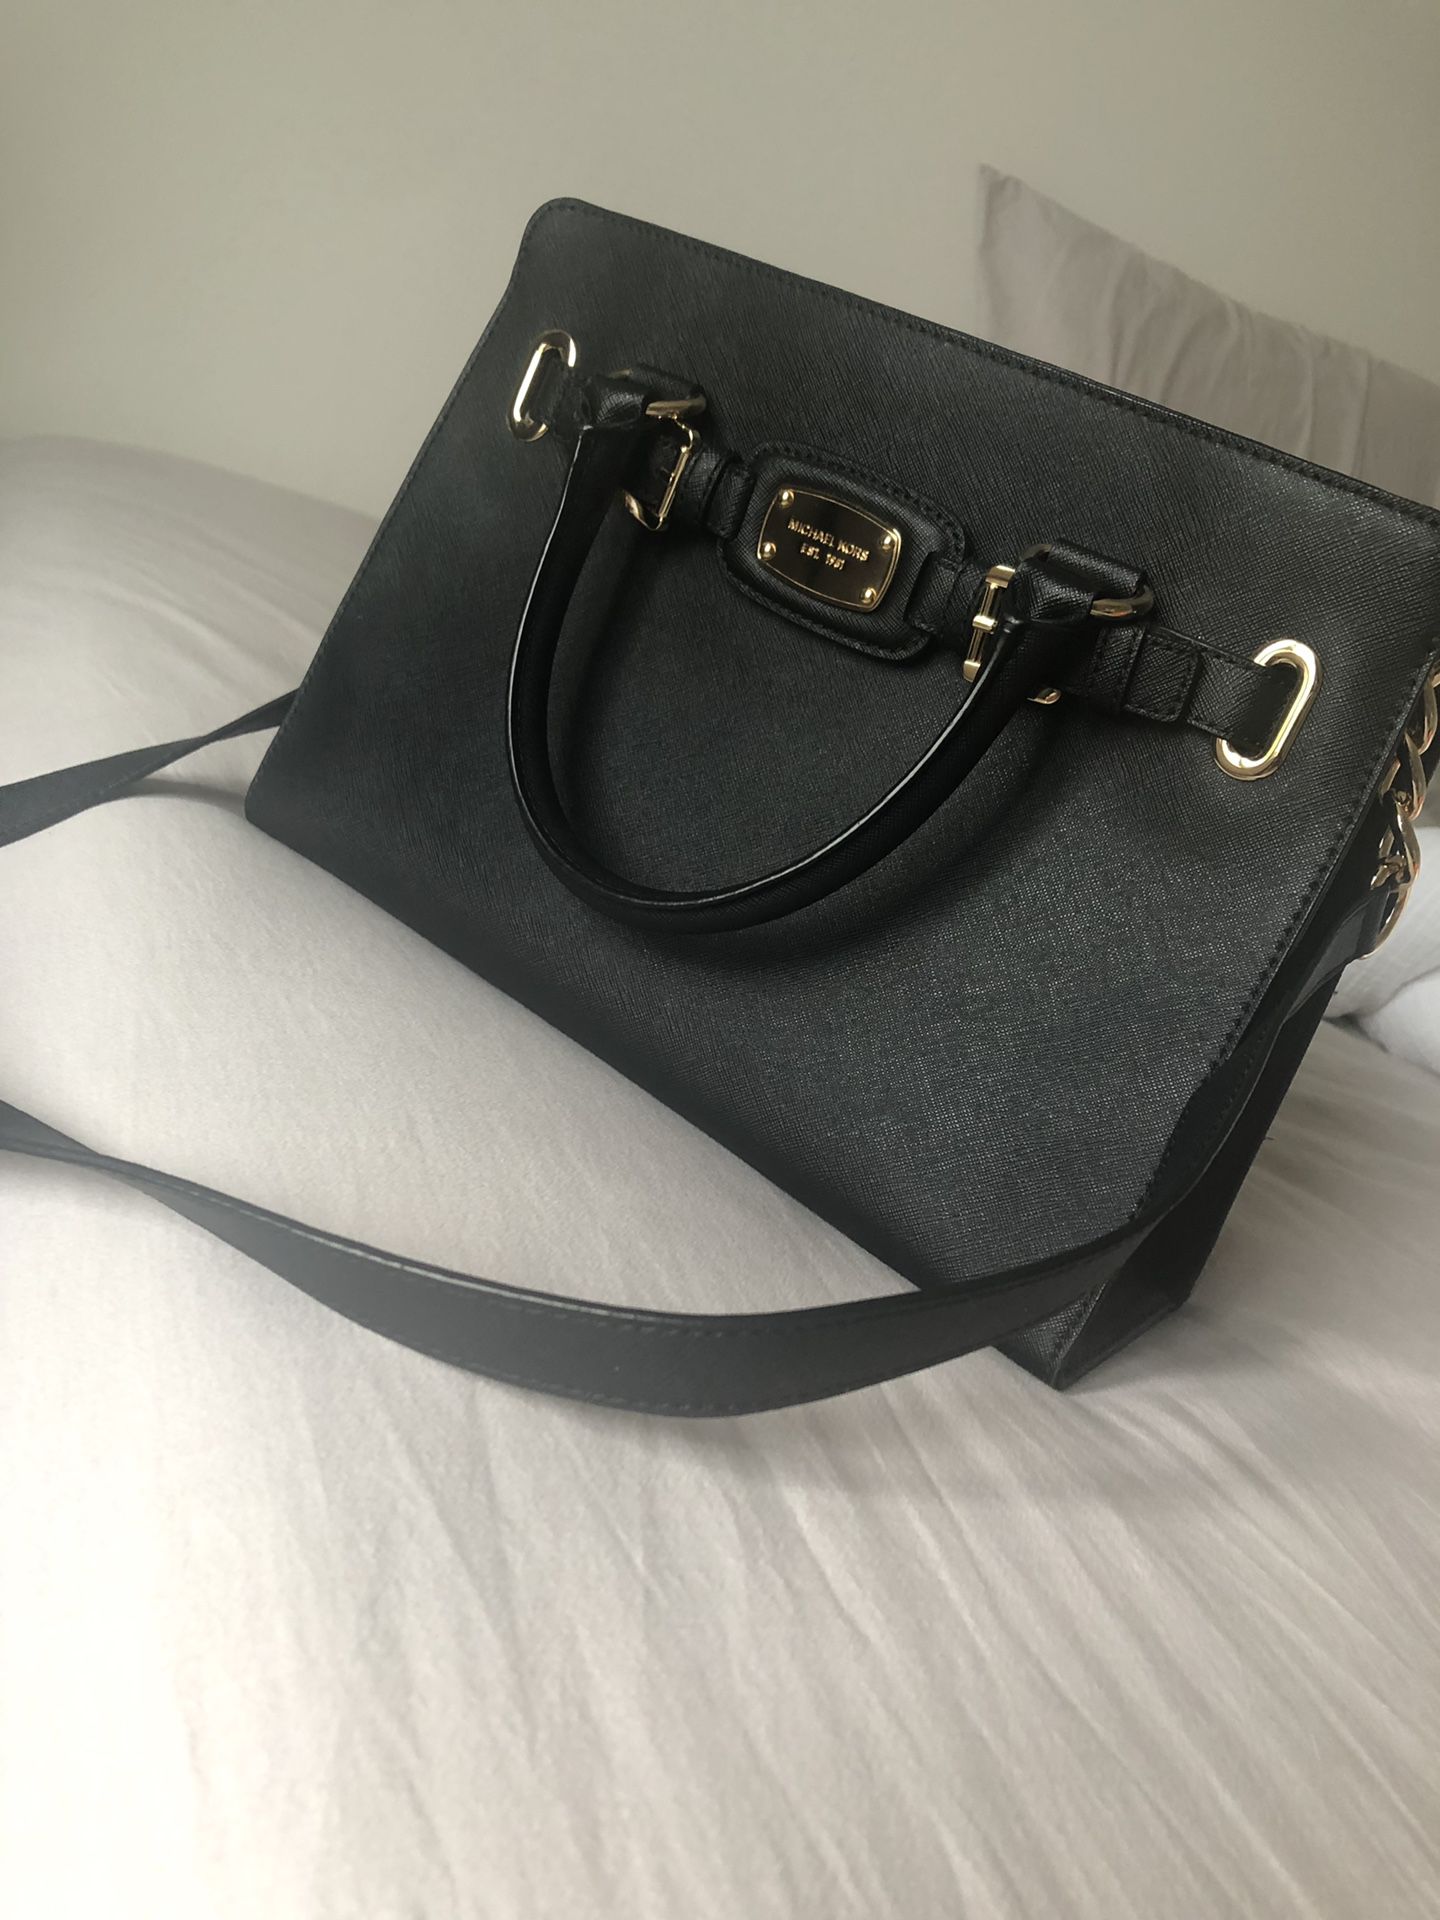 Michael Kors purse with wallet